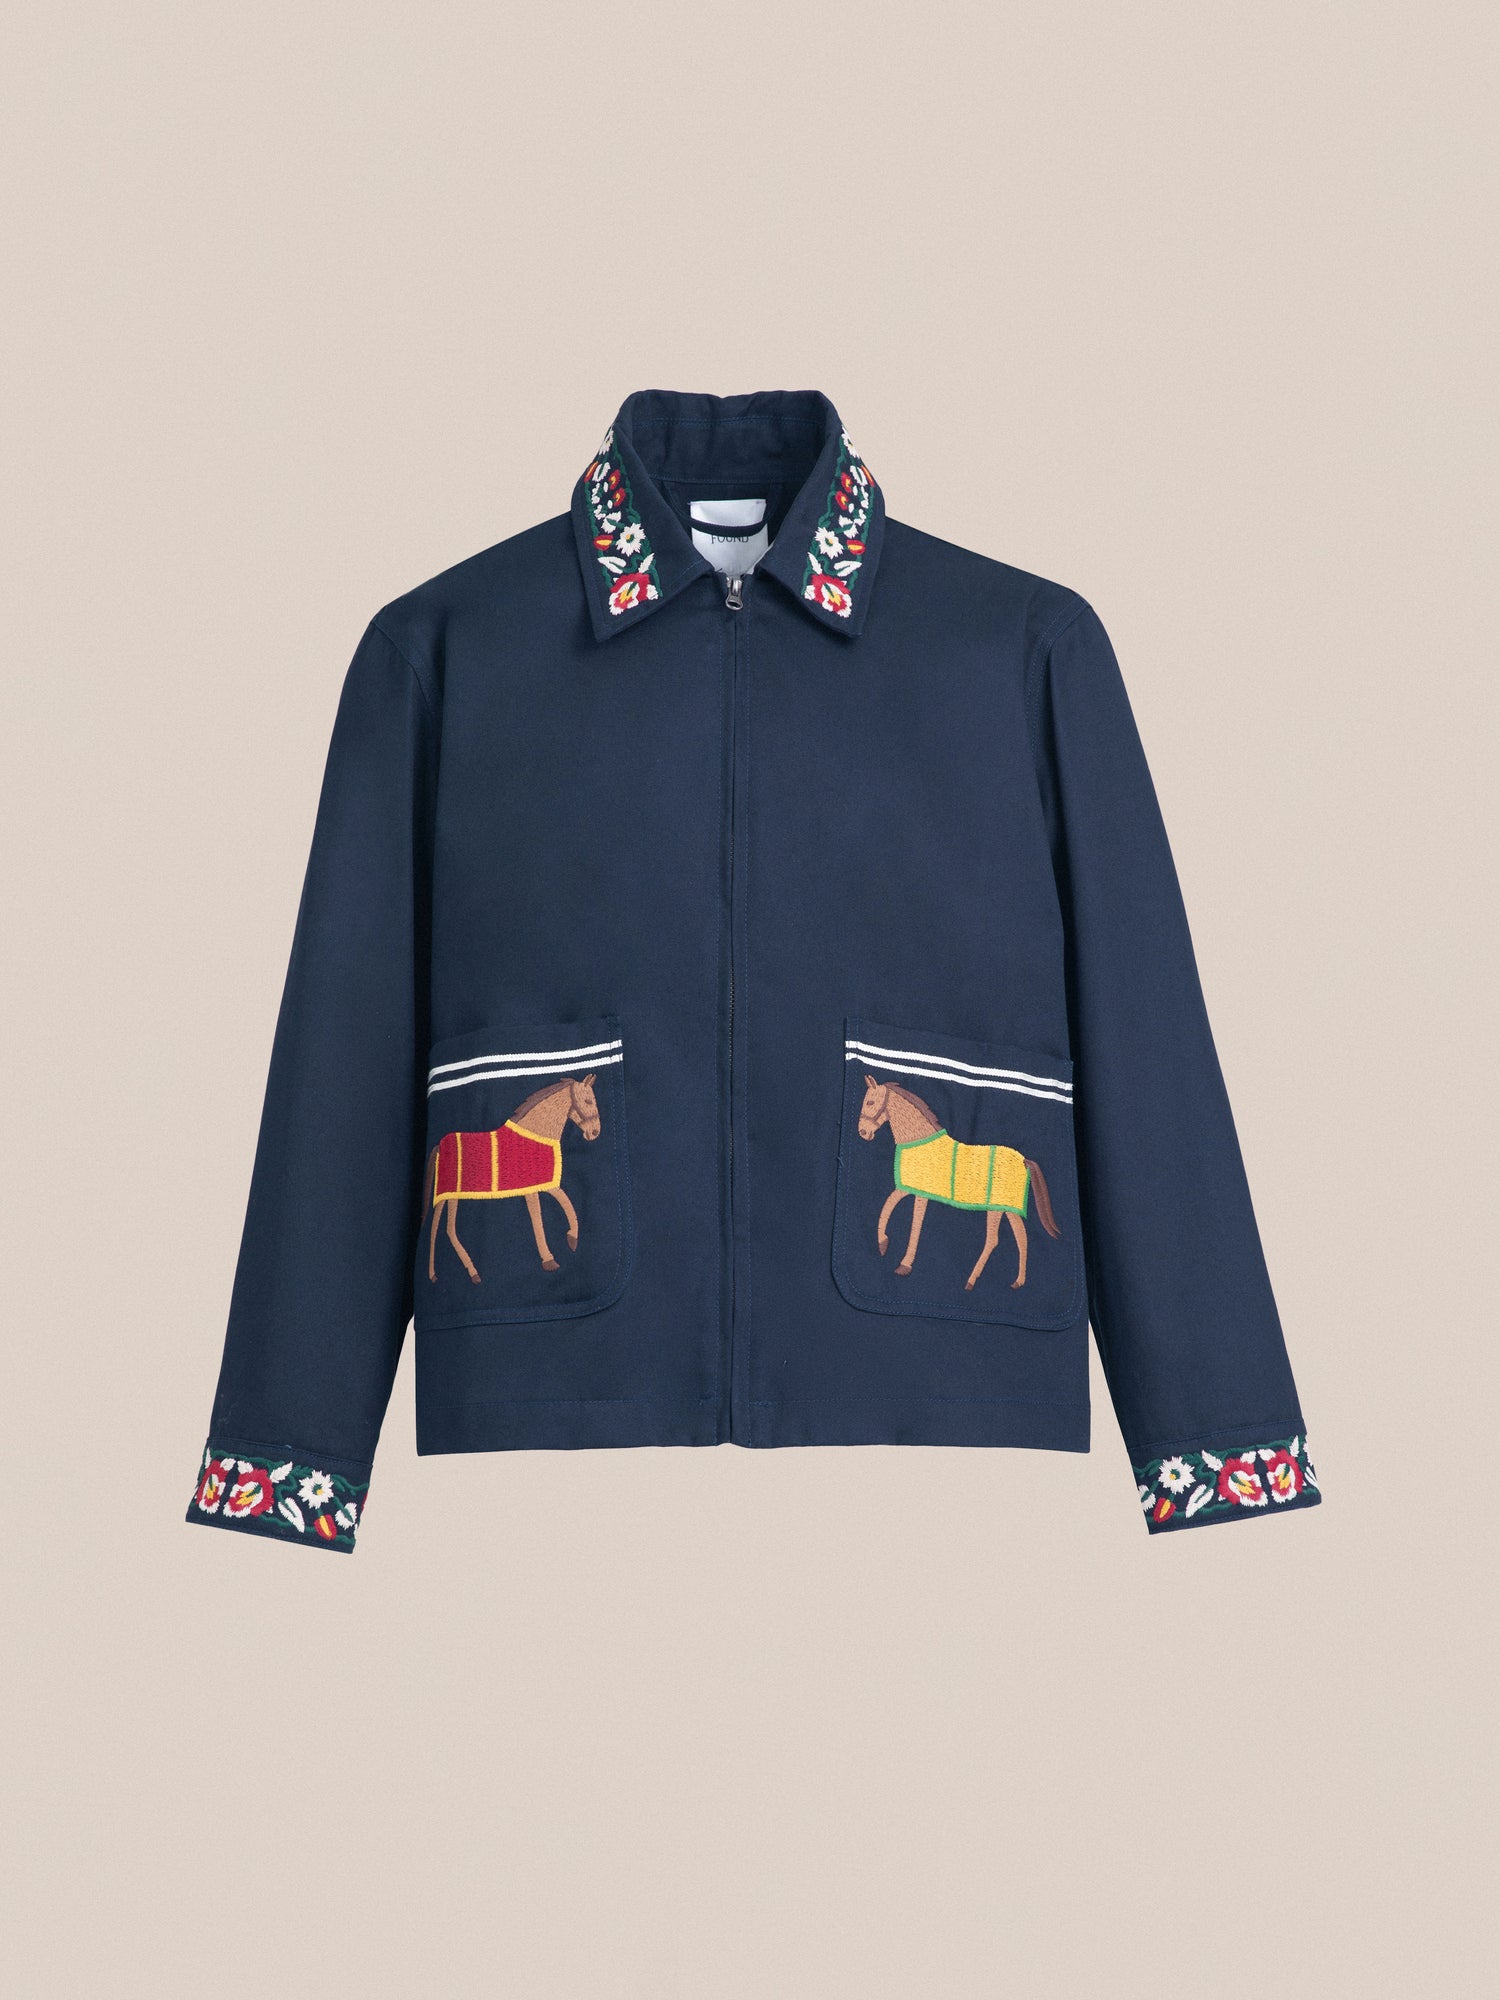 A blue Found Horse Equine Work Jacket with embroidered horses on it, inspired by jockey uniforms.